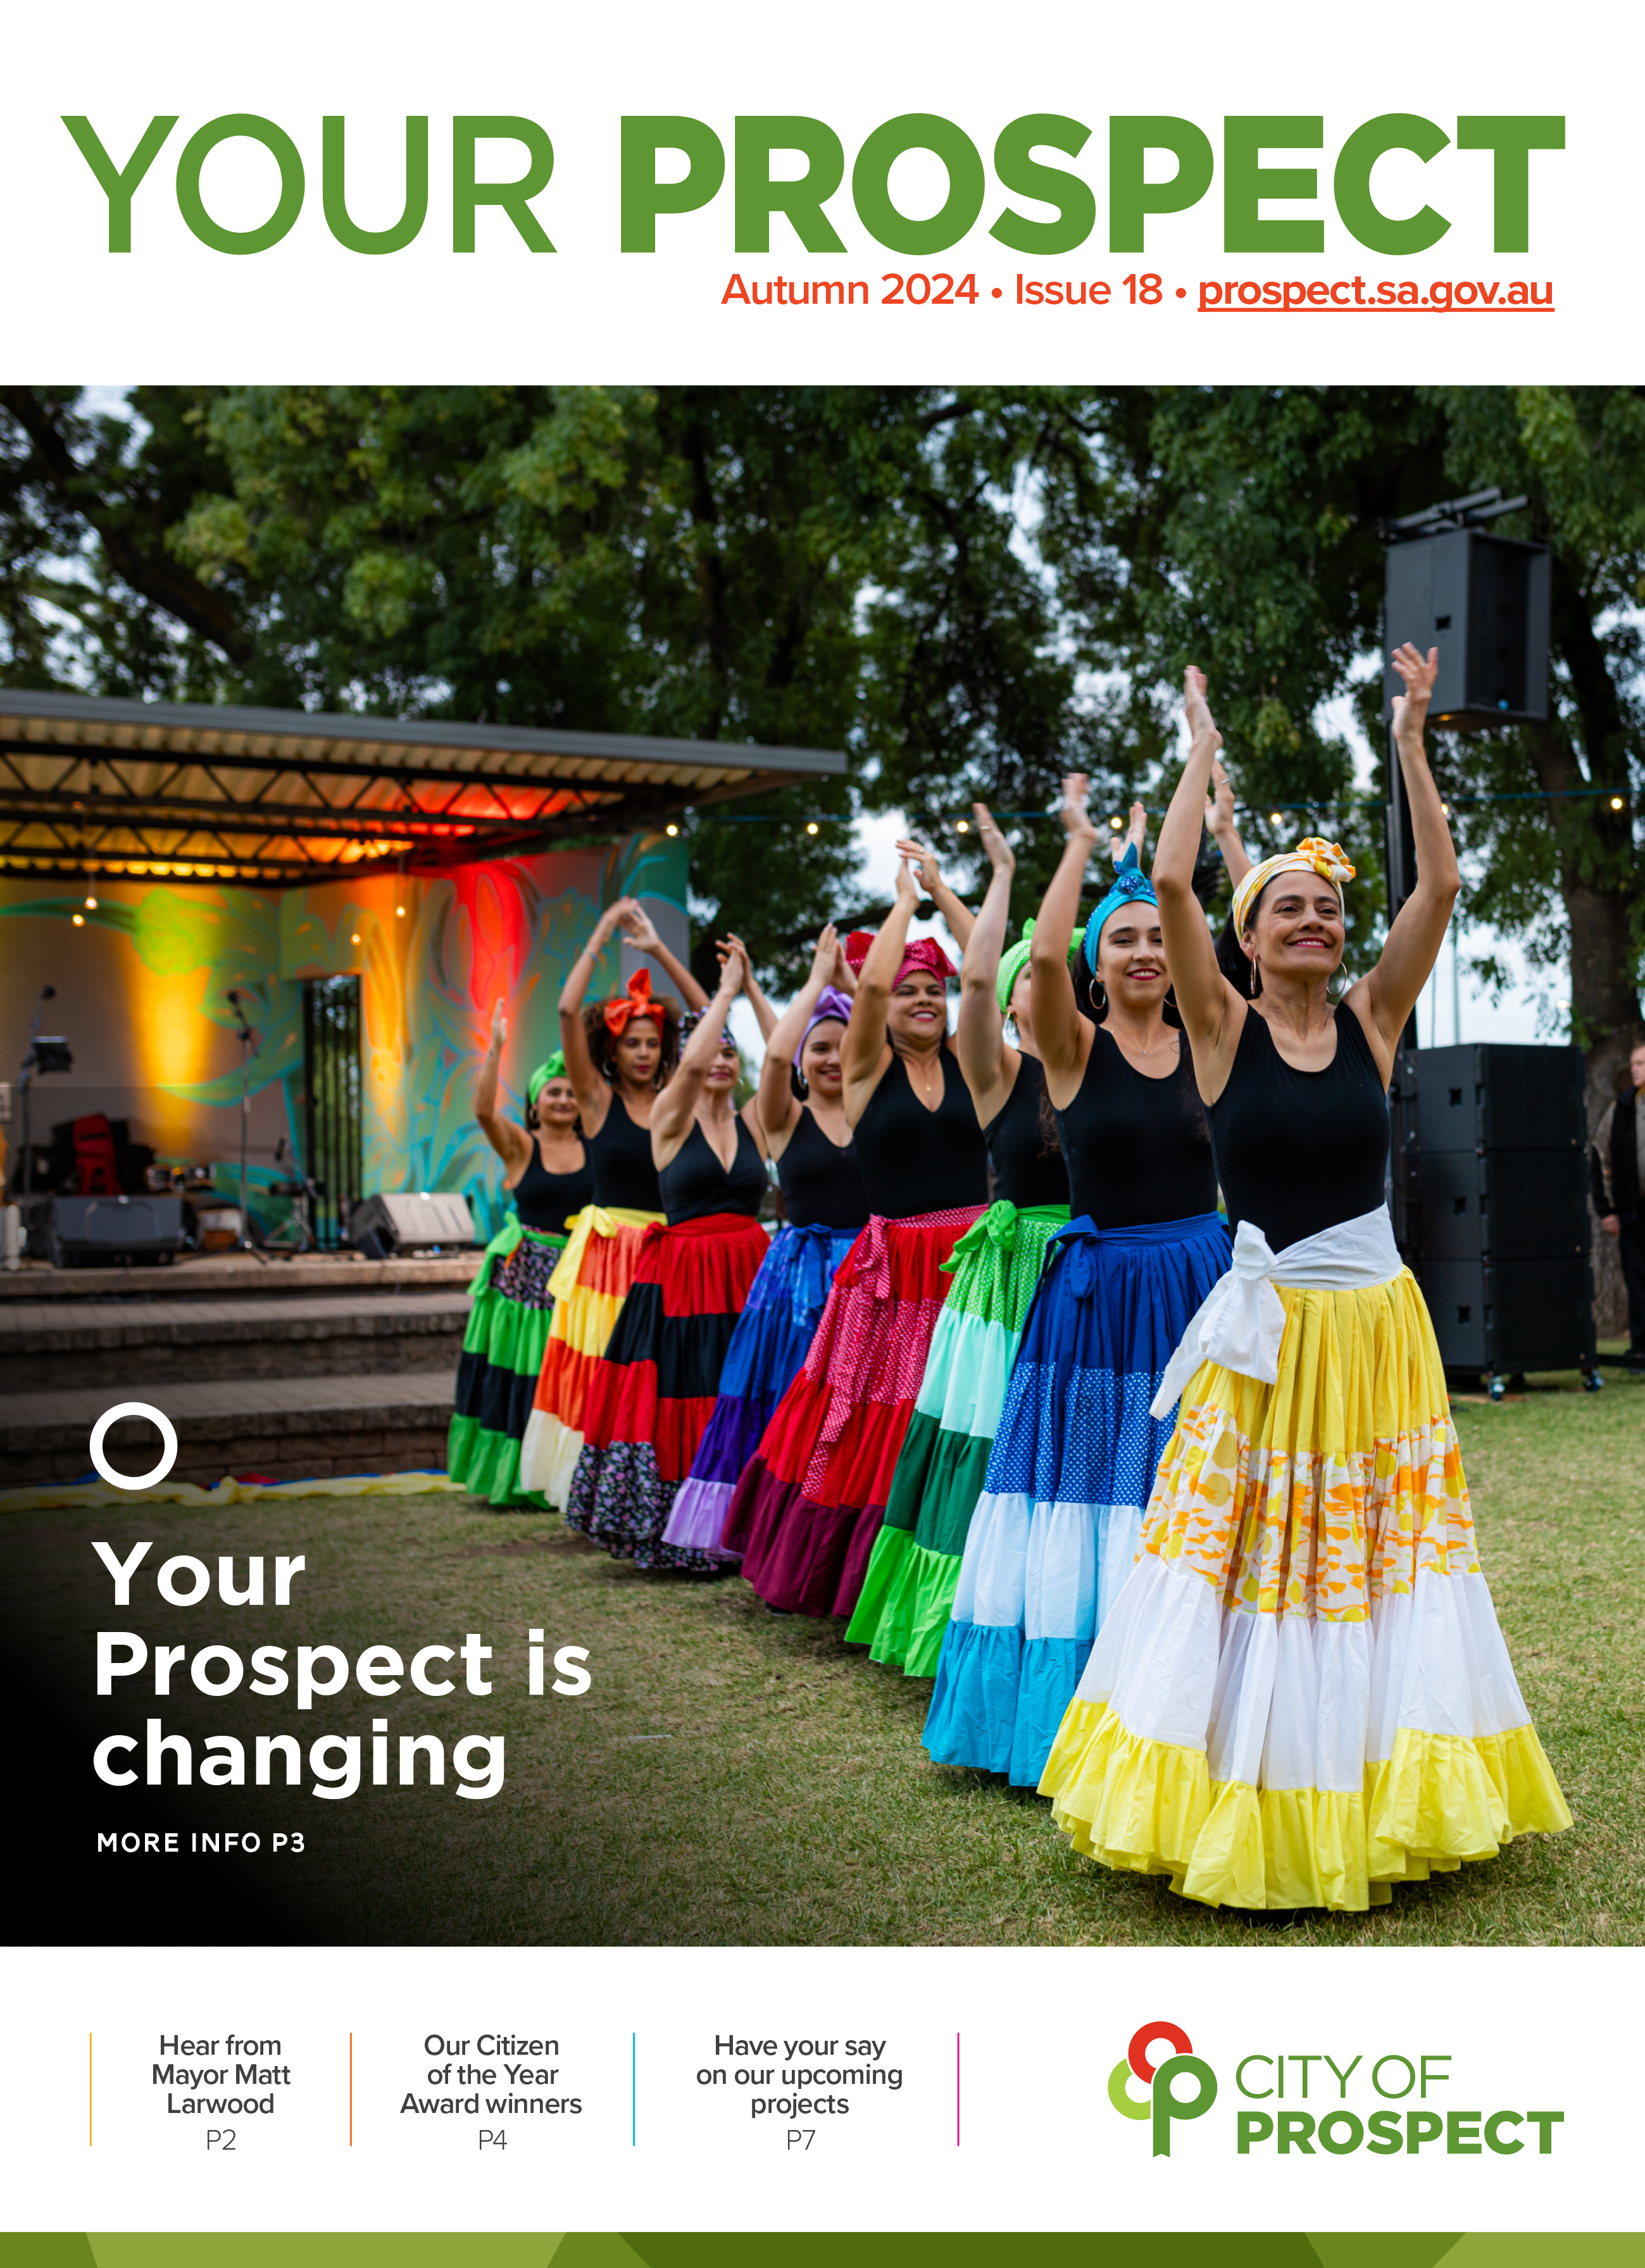 Front cover of Issue 18 with a group of women dancing in colourful skirts